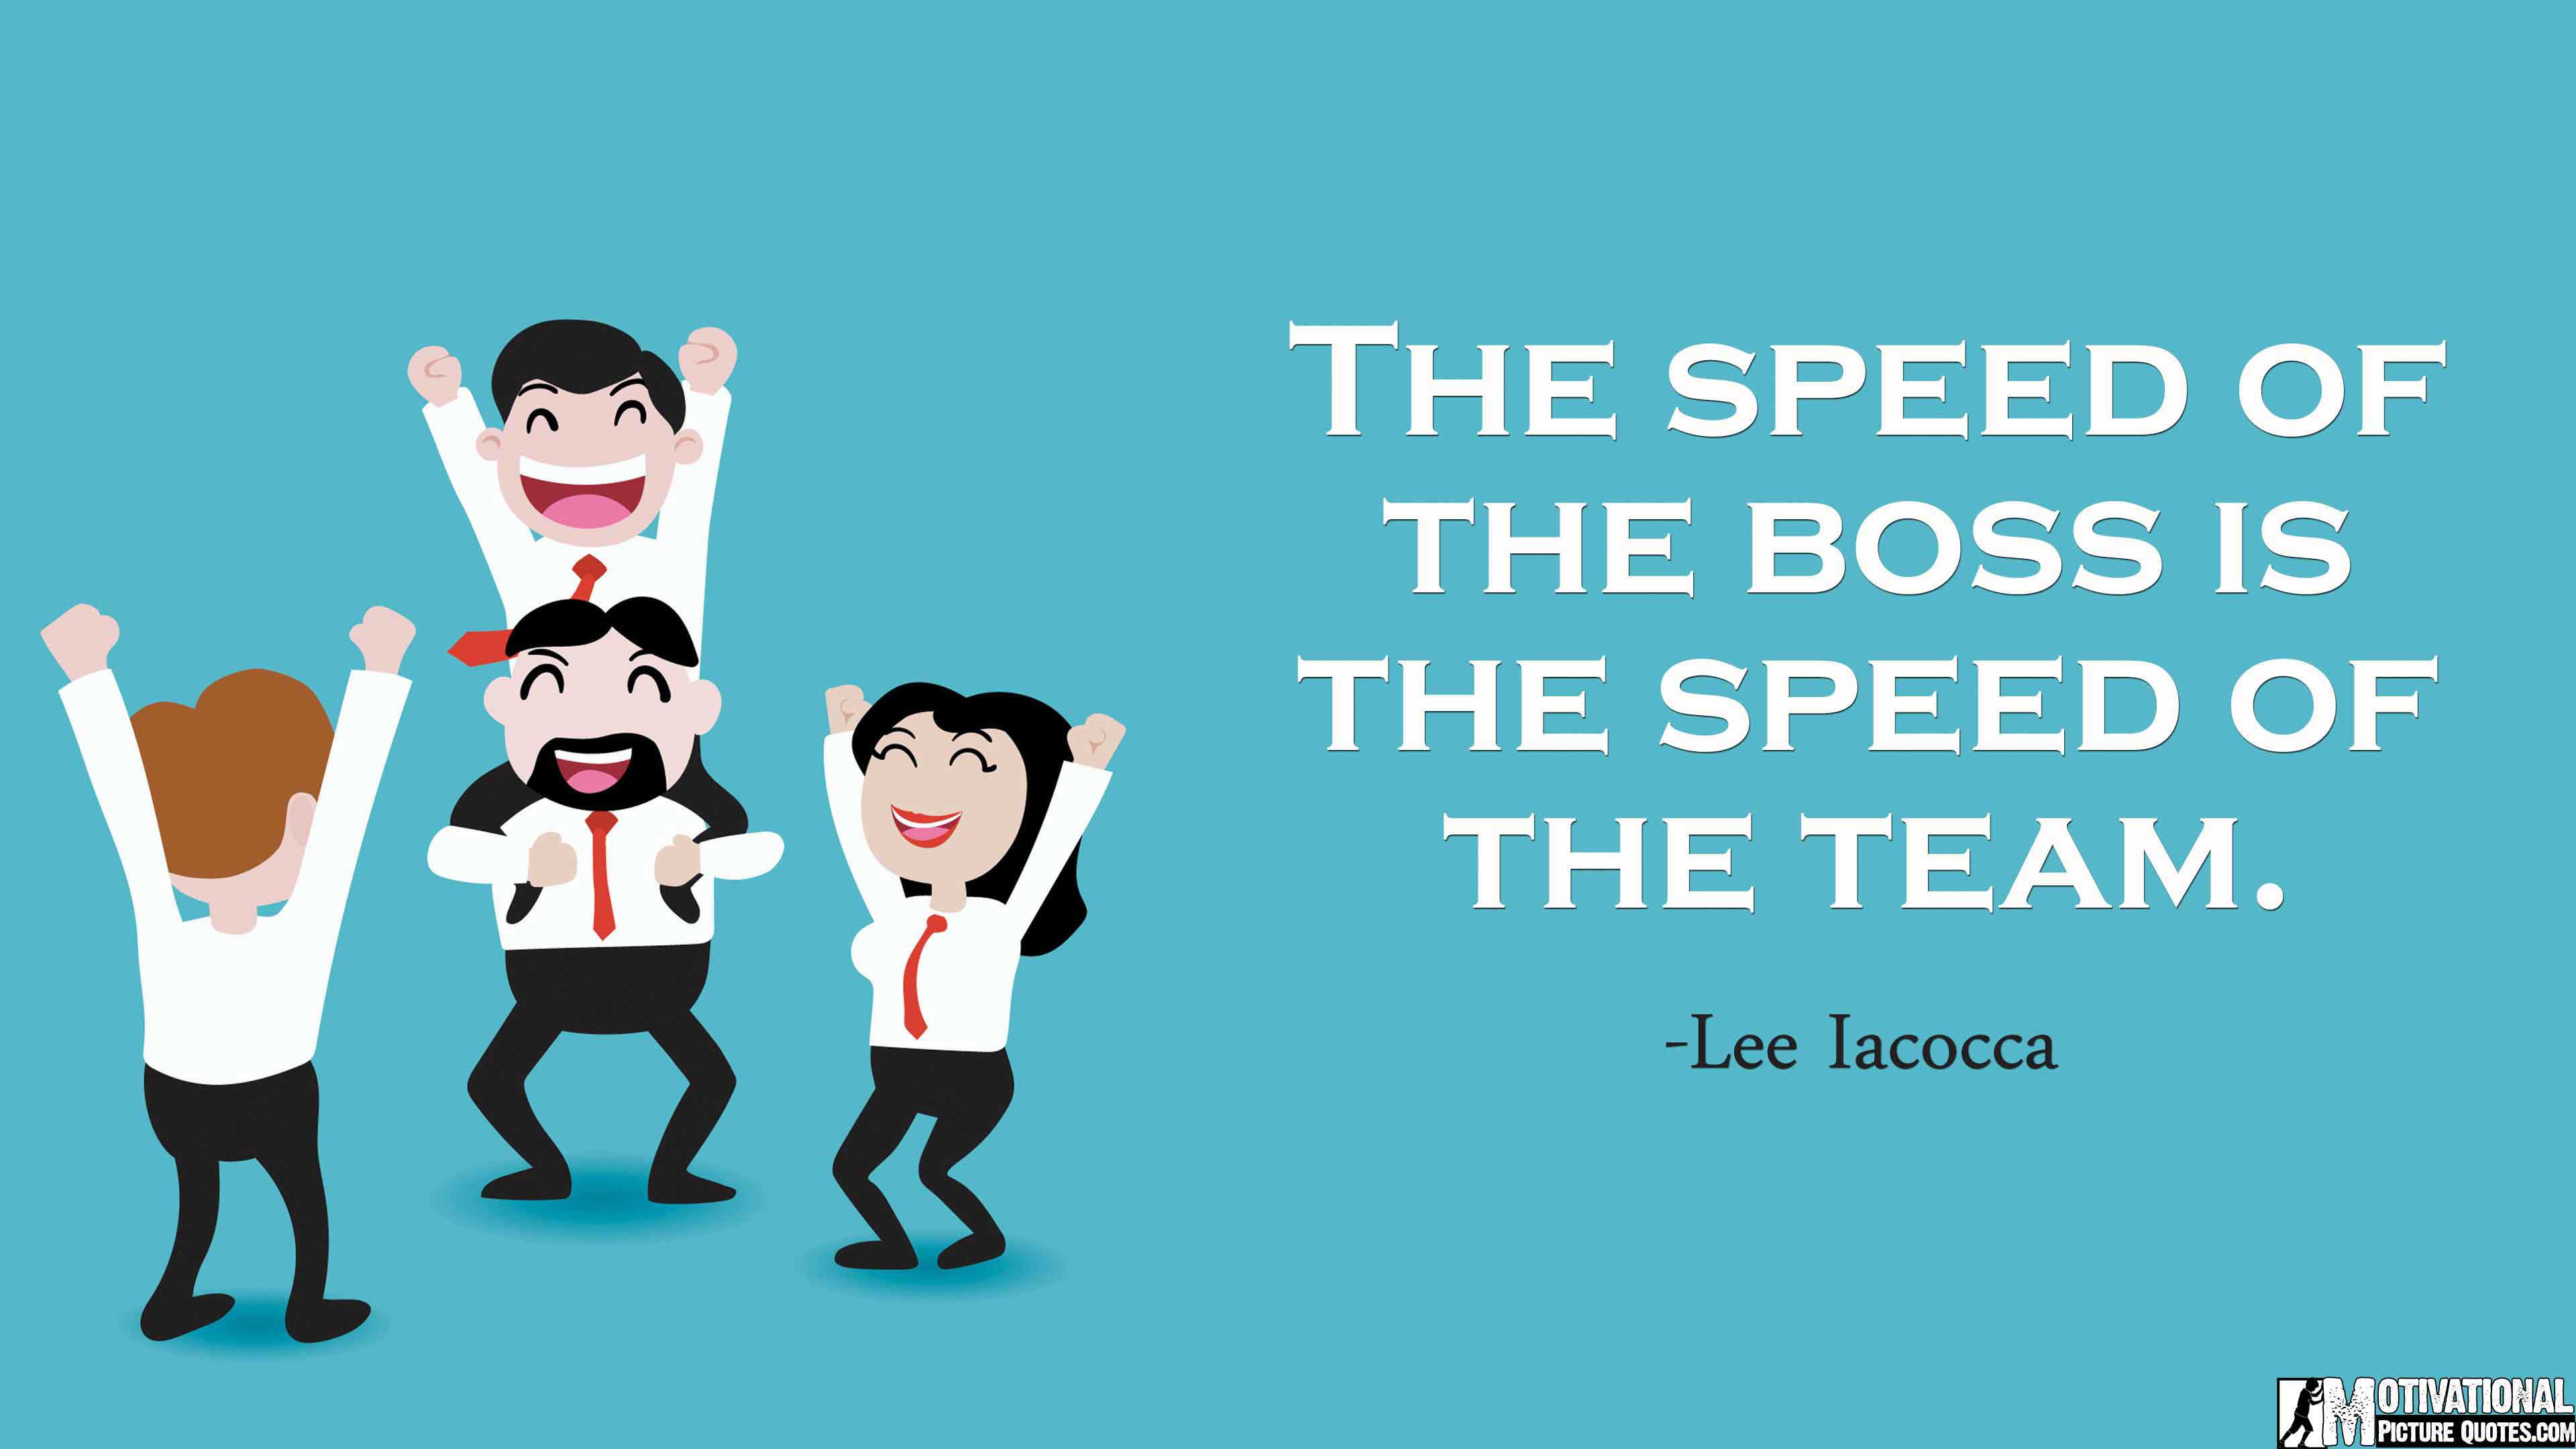 Team Building Quotes For Work | Quote for days